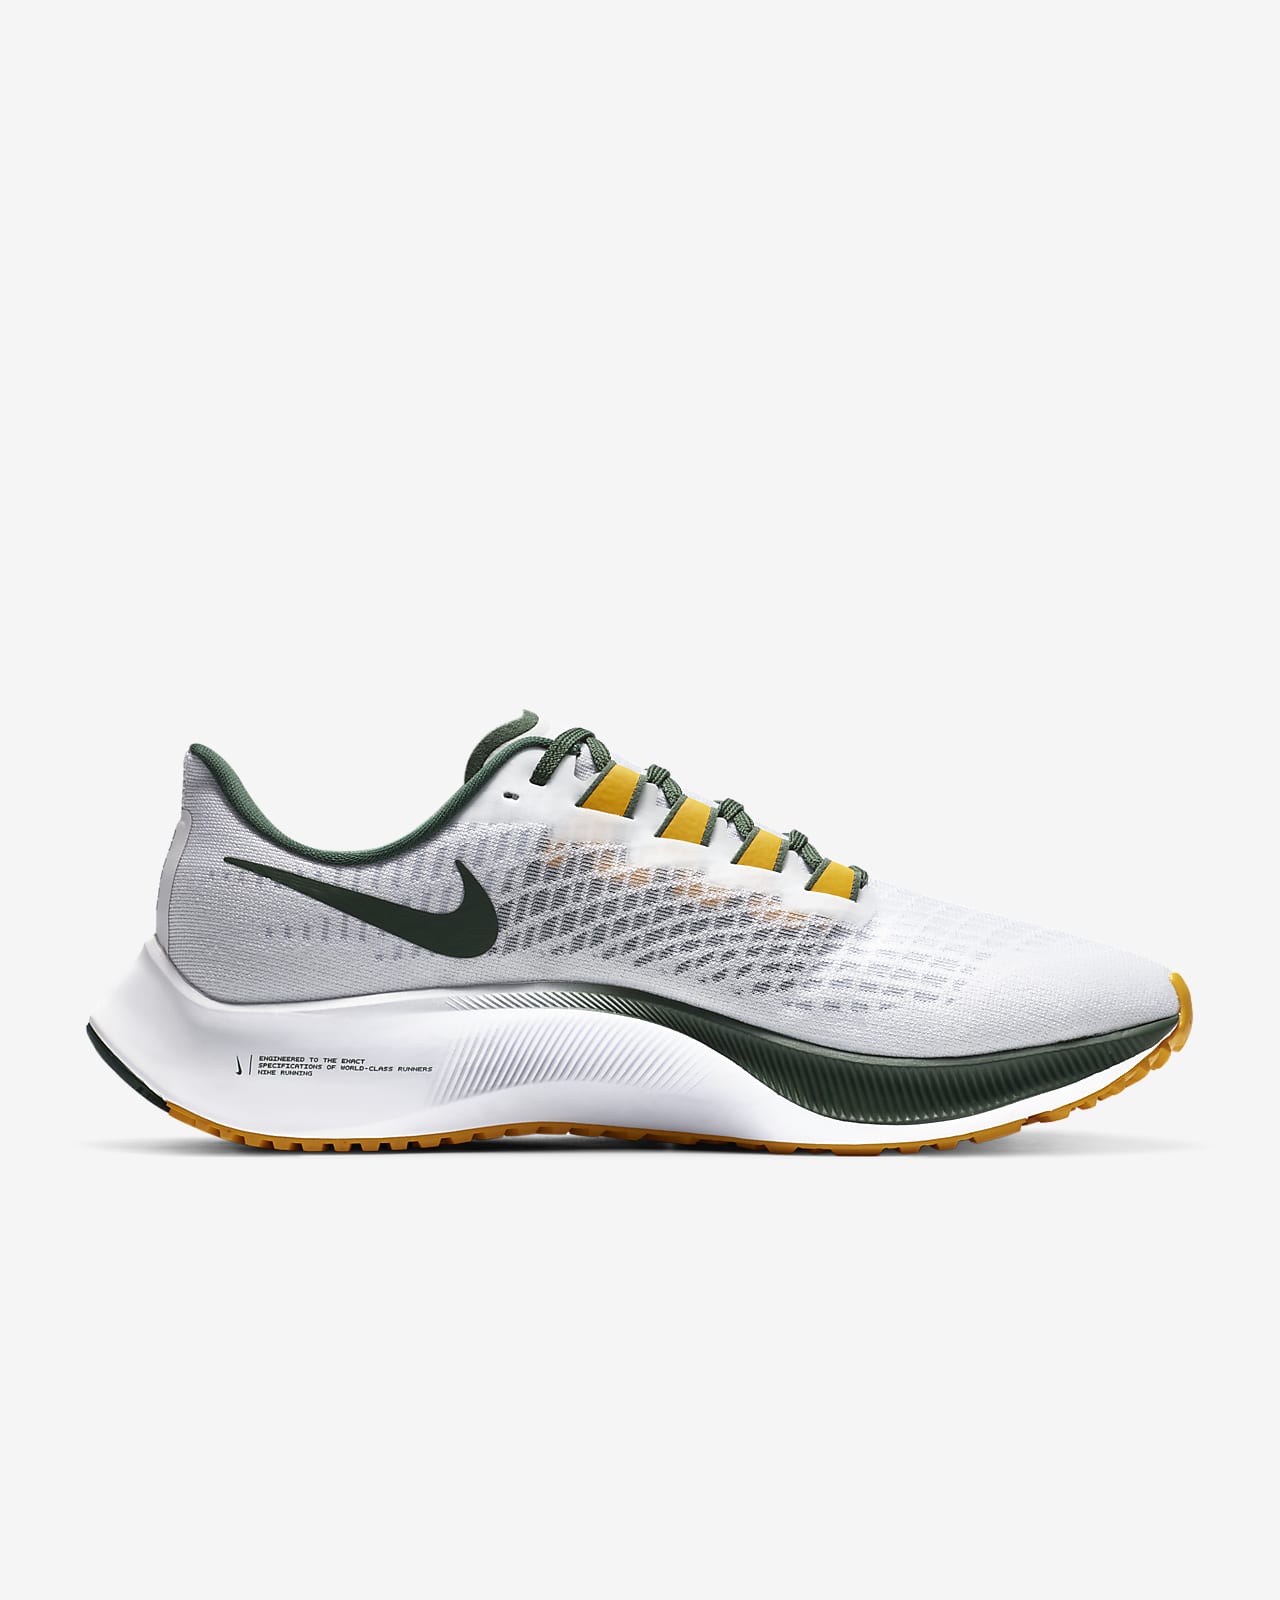 the bay nike running shoes